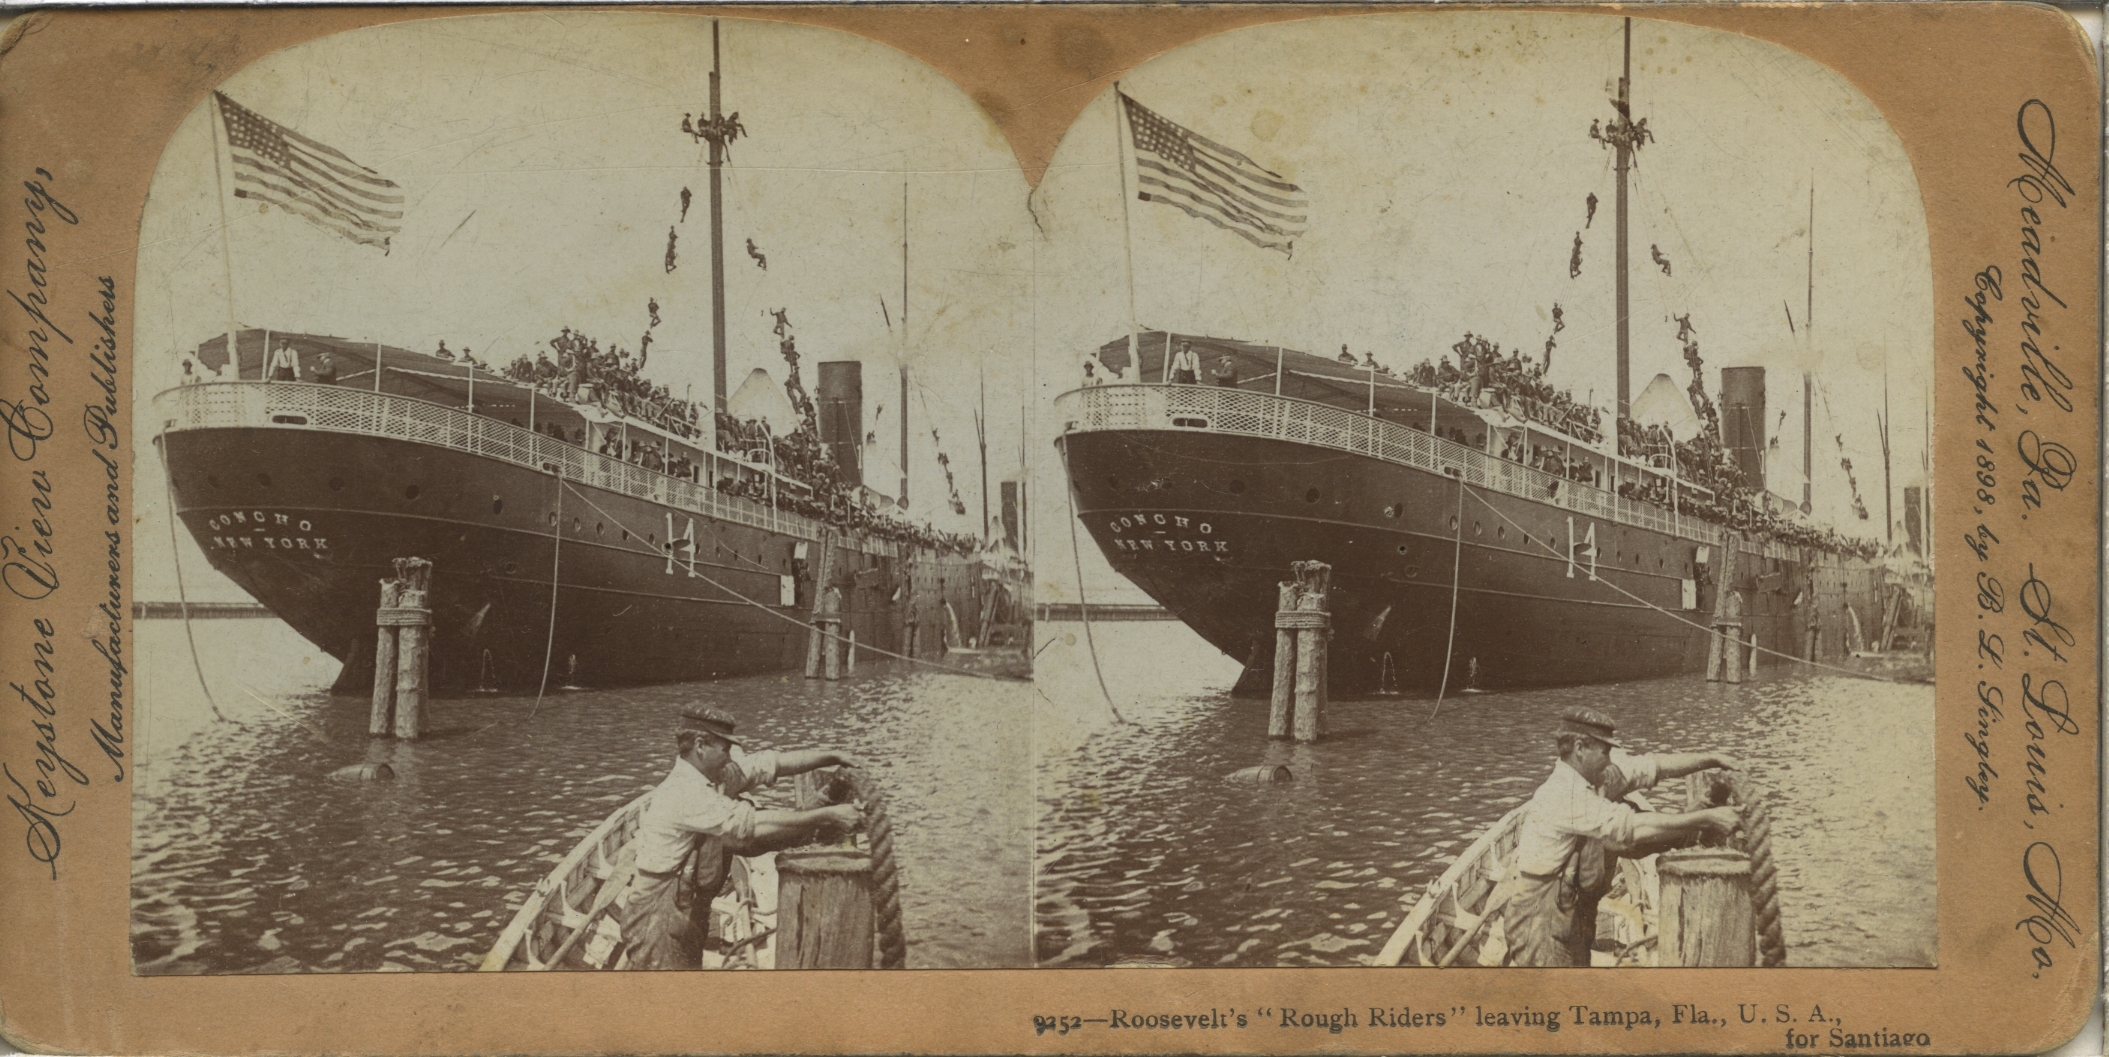 Roosevelt's "Rough Riders" leaving Tampa, Fla., U.S.A., for Santiago